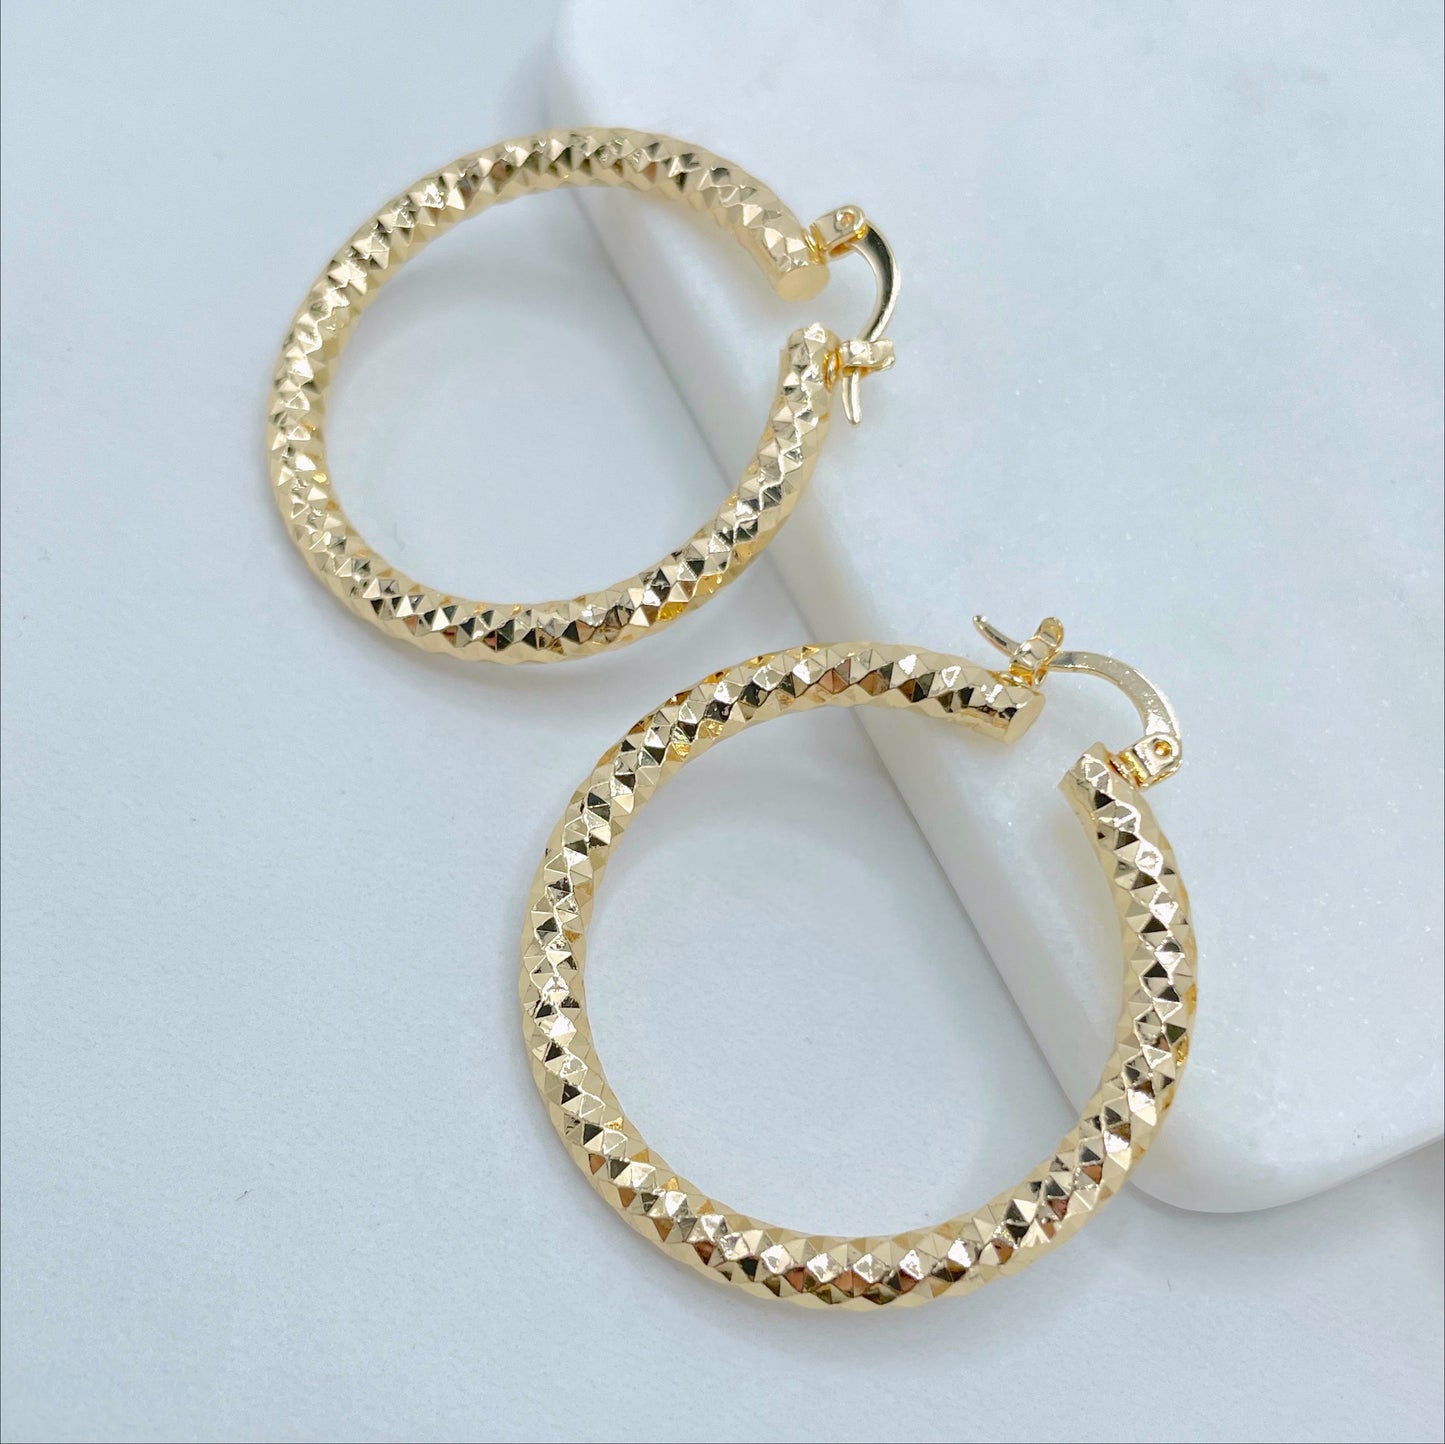 18k Gold Filled 4mm Thickness 40mm Textured Hoops Earrings Wholesale Jewelry Making Supplies